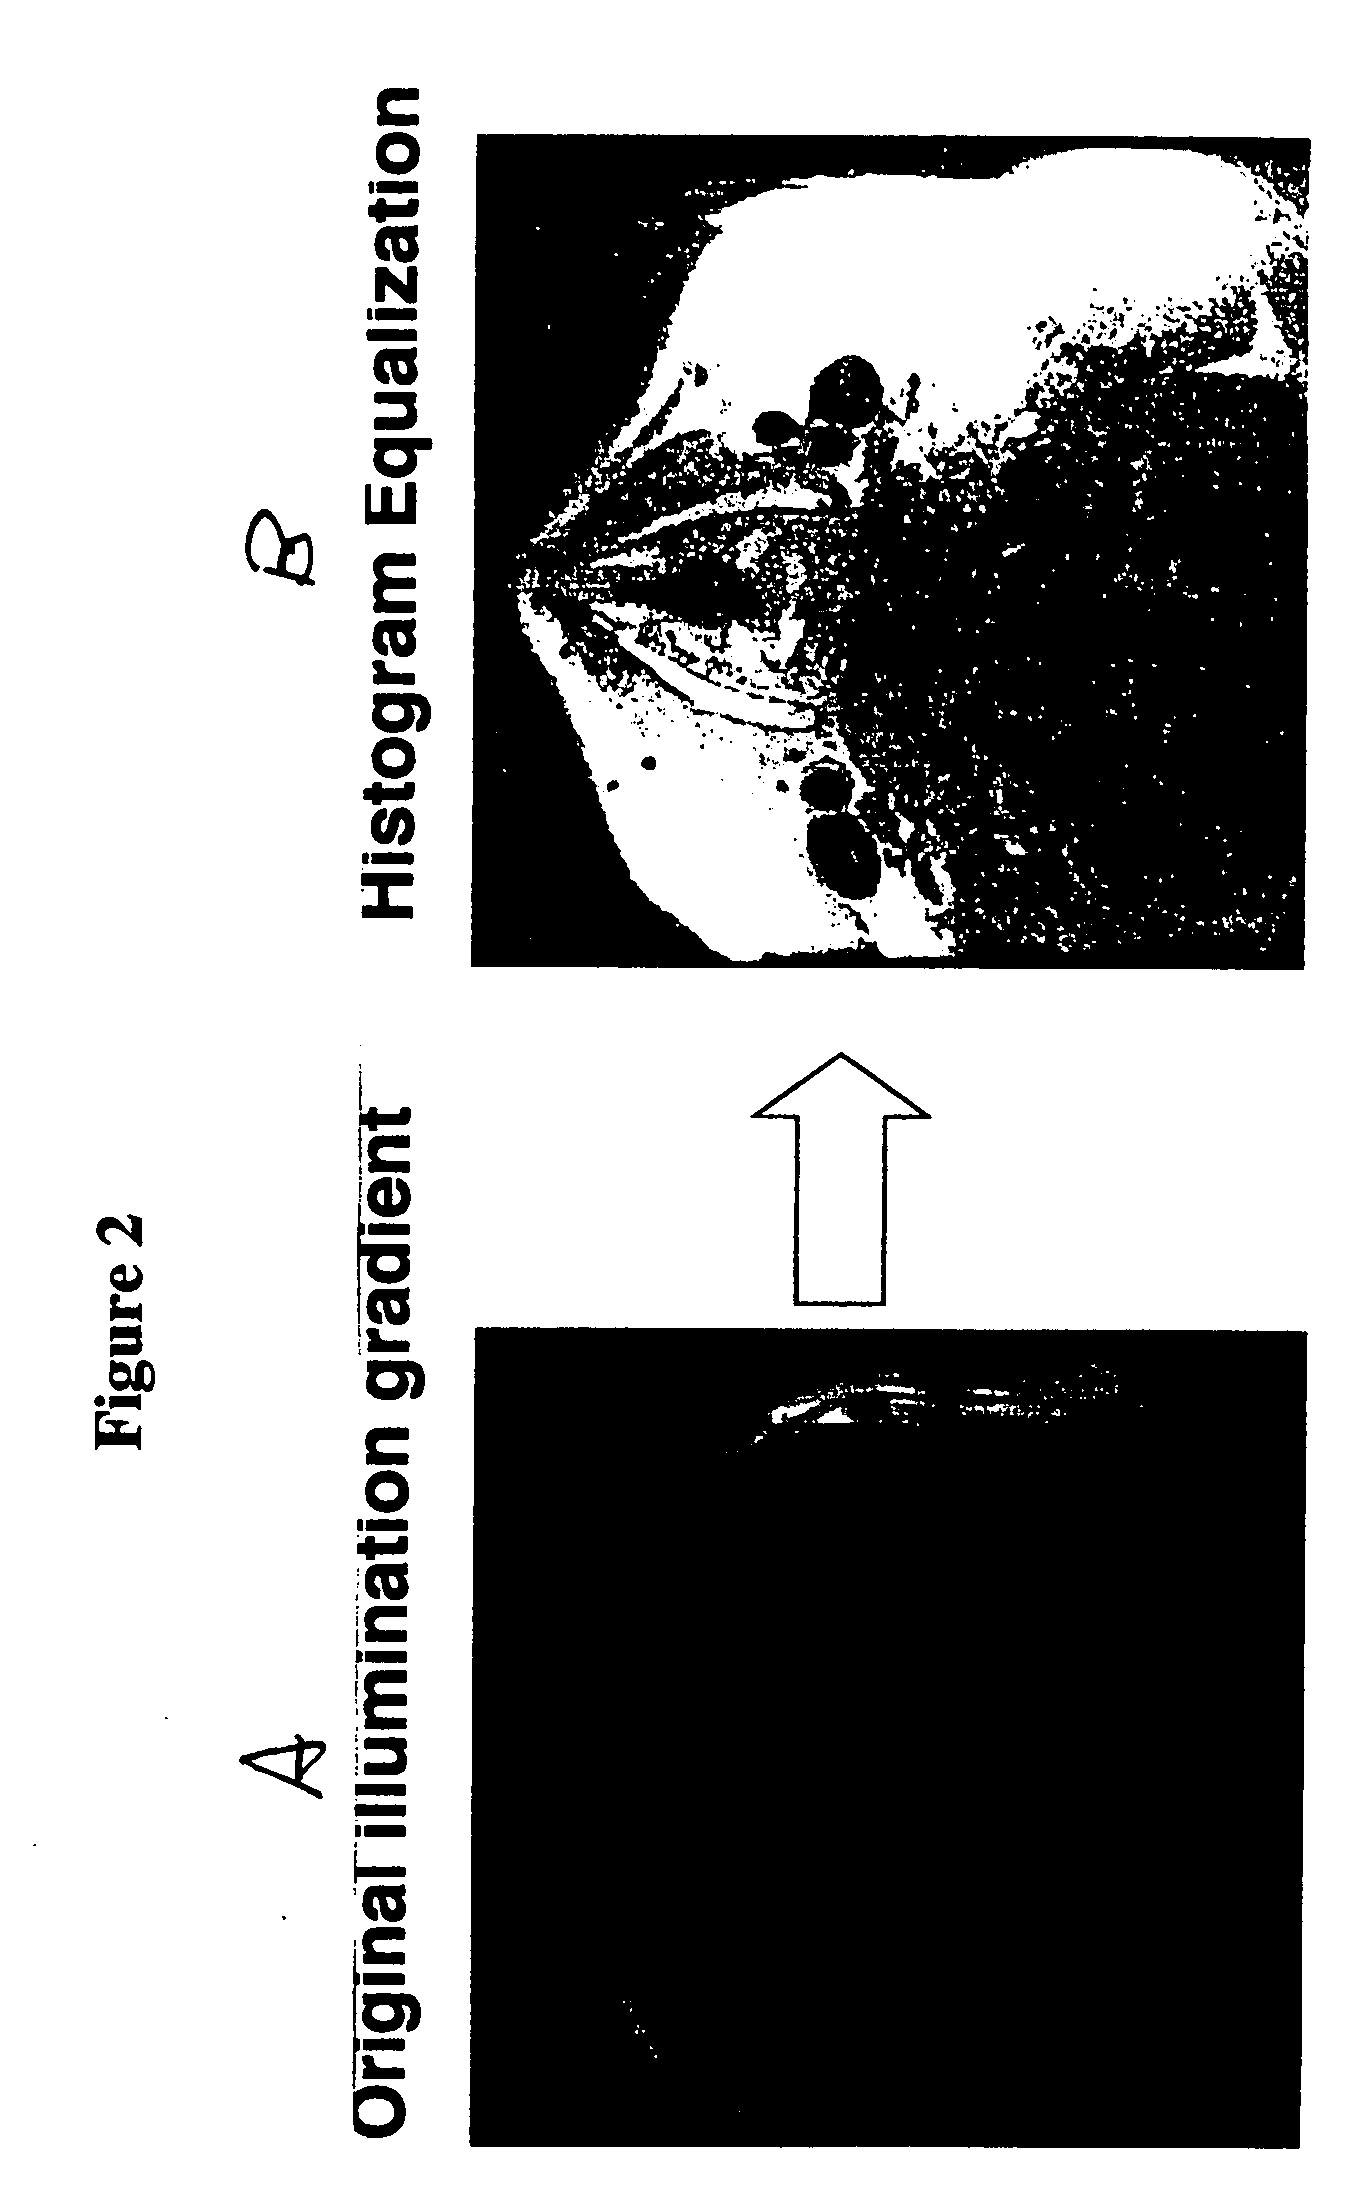 Automated methods and systems for vascular plaque detection and analysis